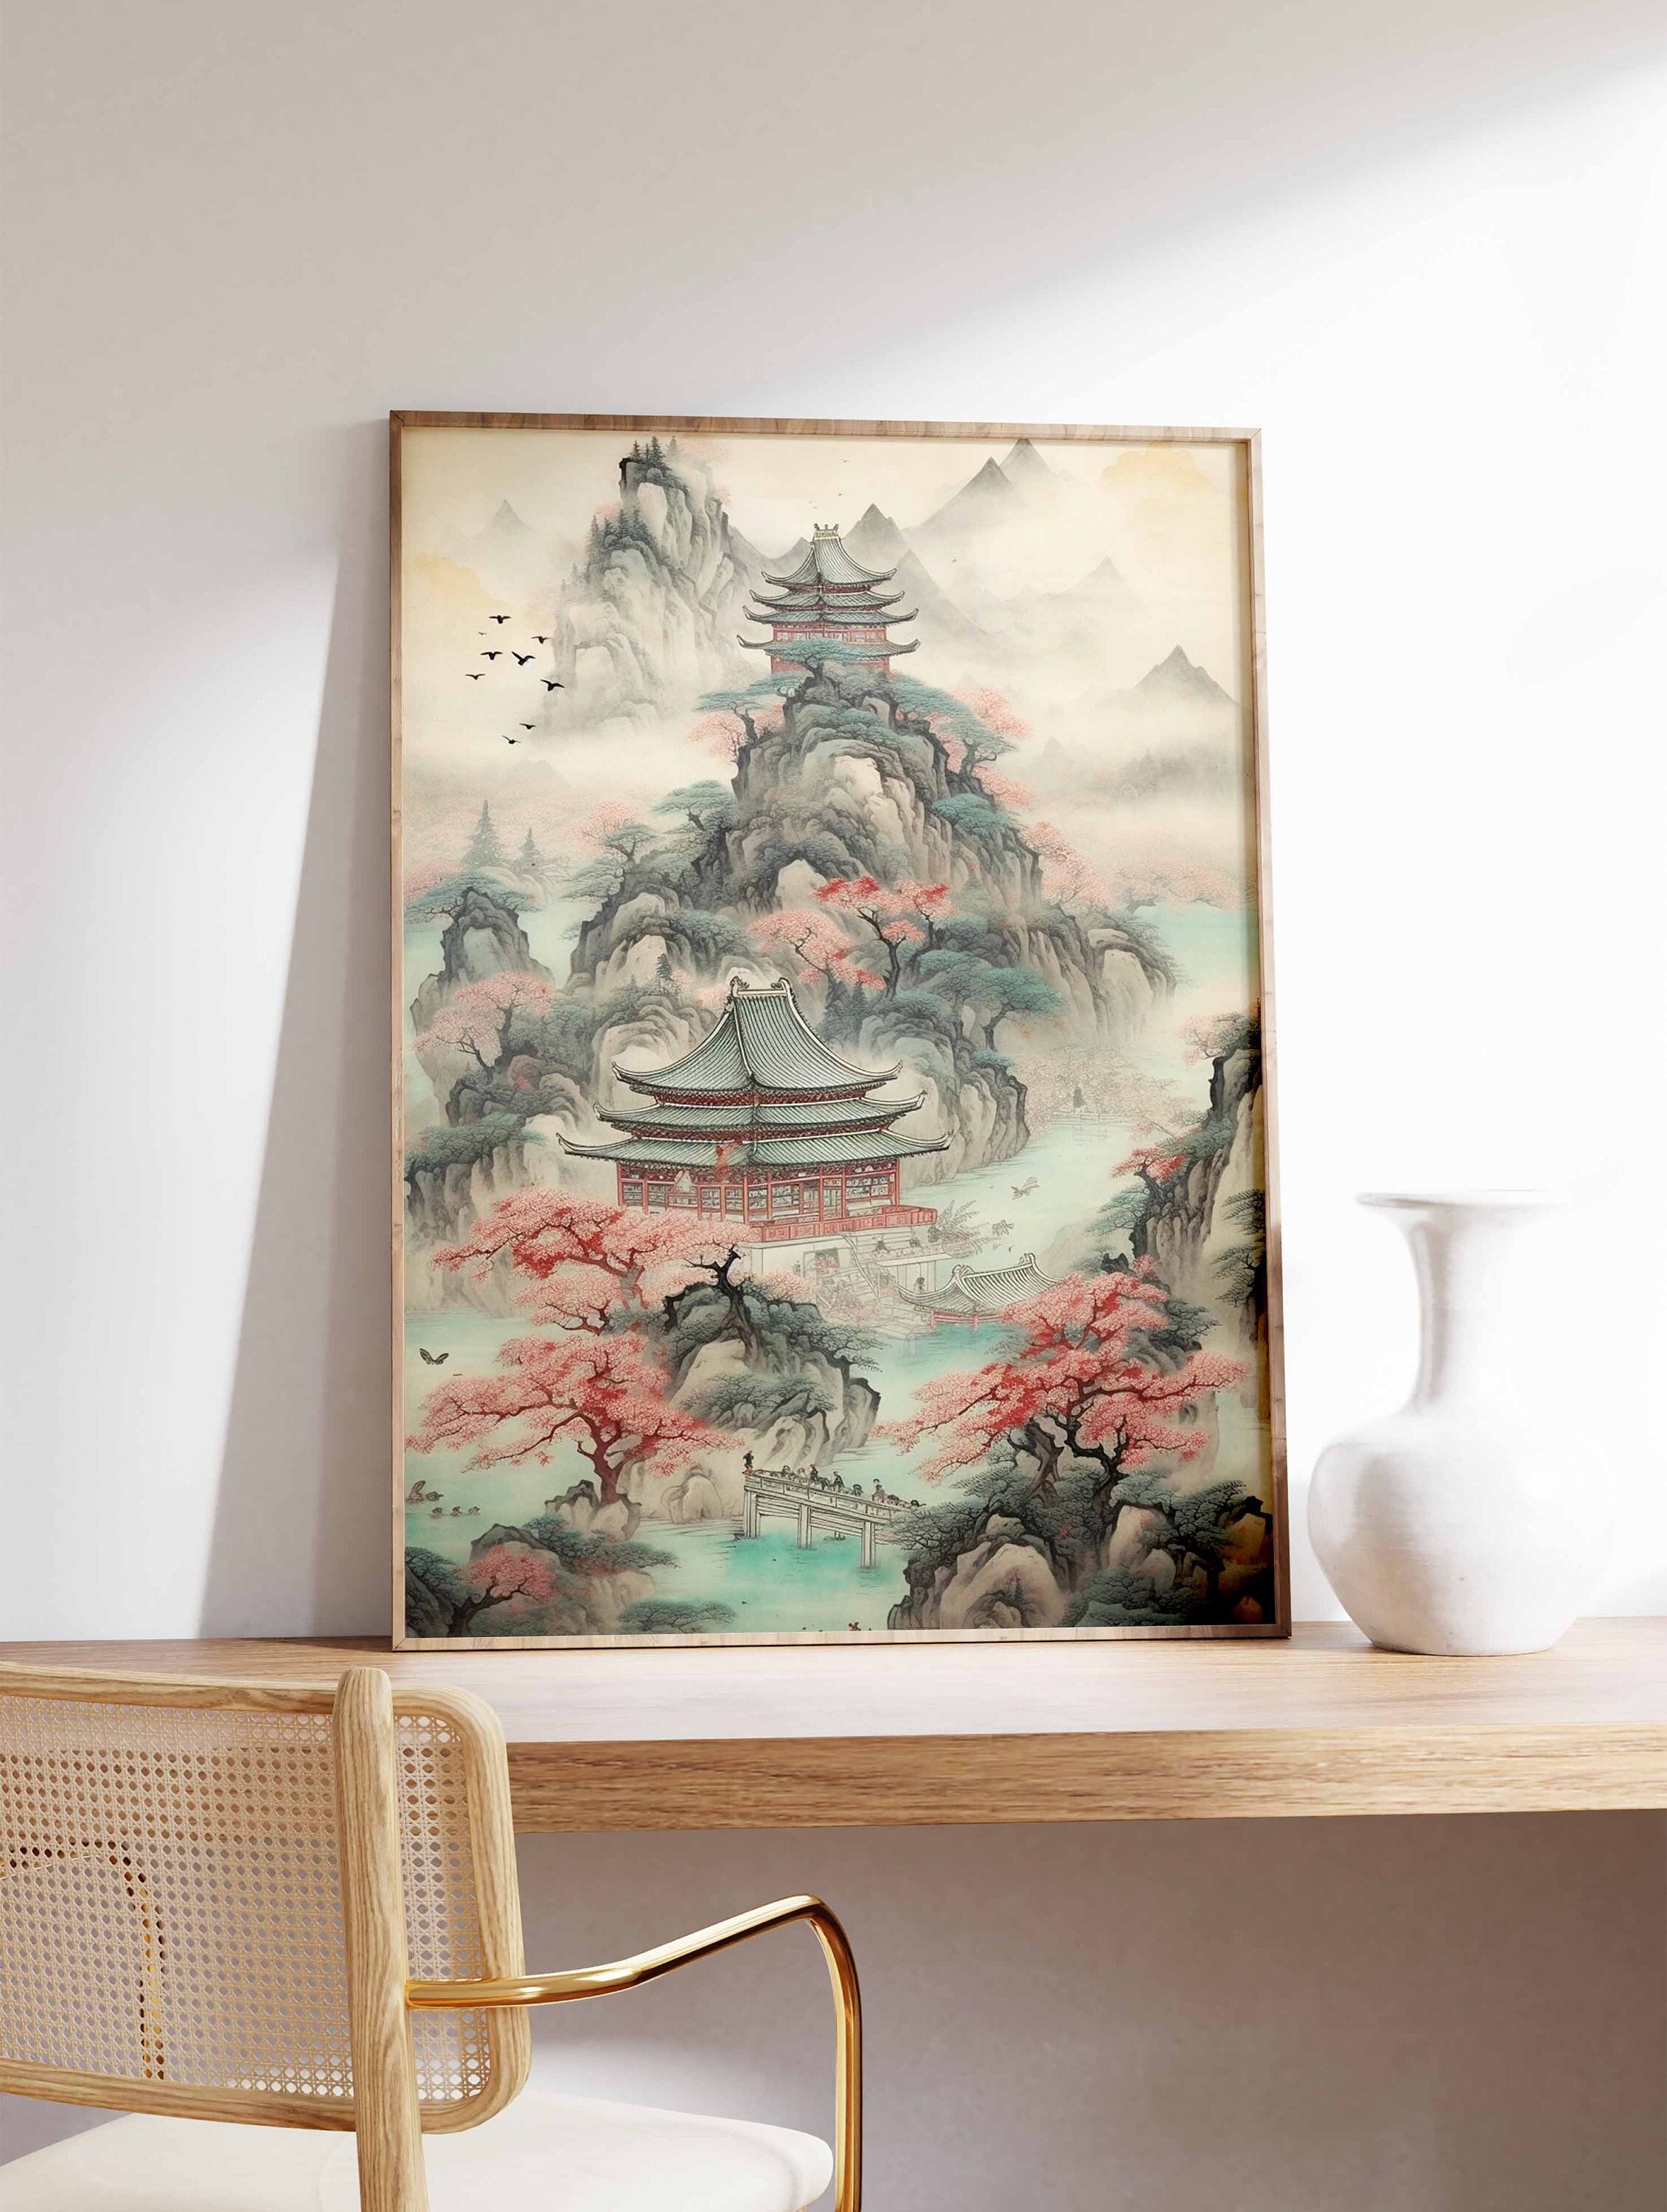 Discover Chinese Vintage Poster, Chinese Art, Vintage Art, Oriental Art, Chinese Print, Asian Decor, Landscape Art, Floral Art, Gift Idea